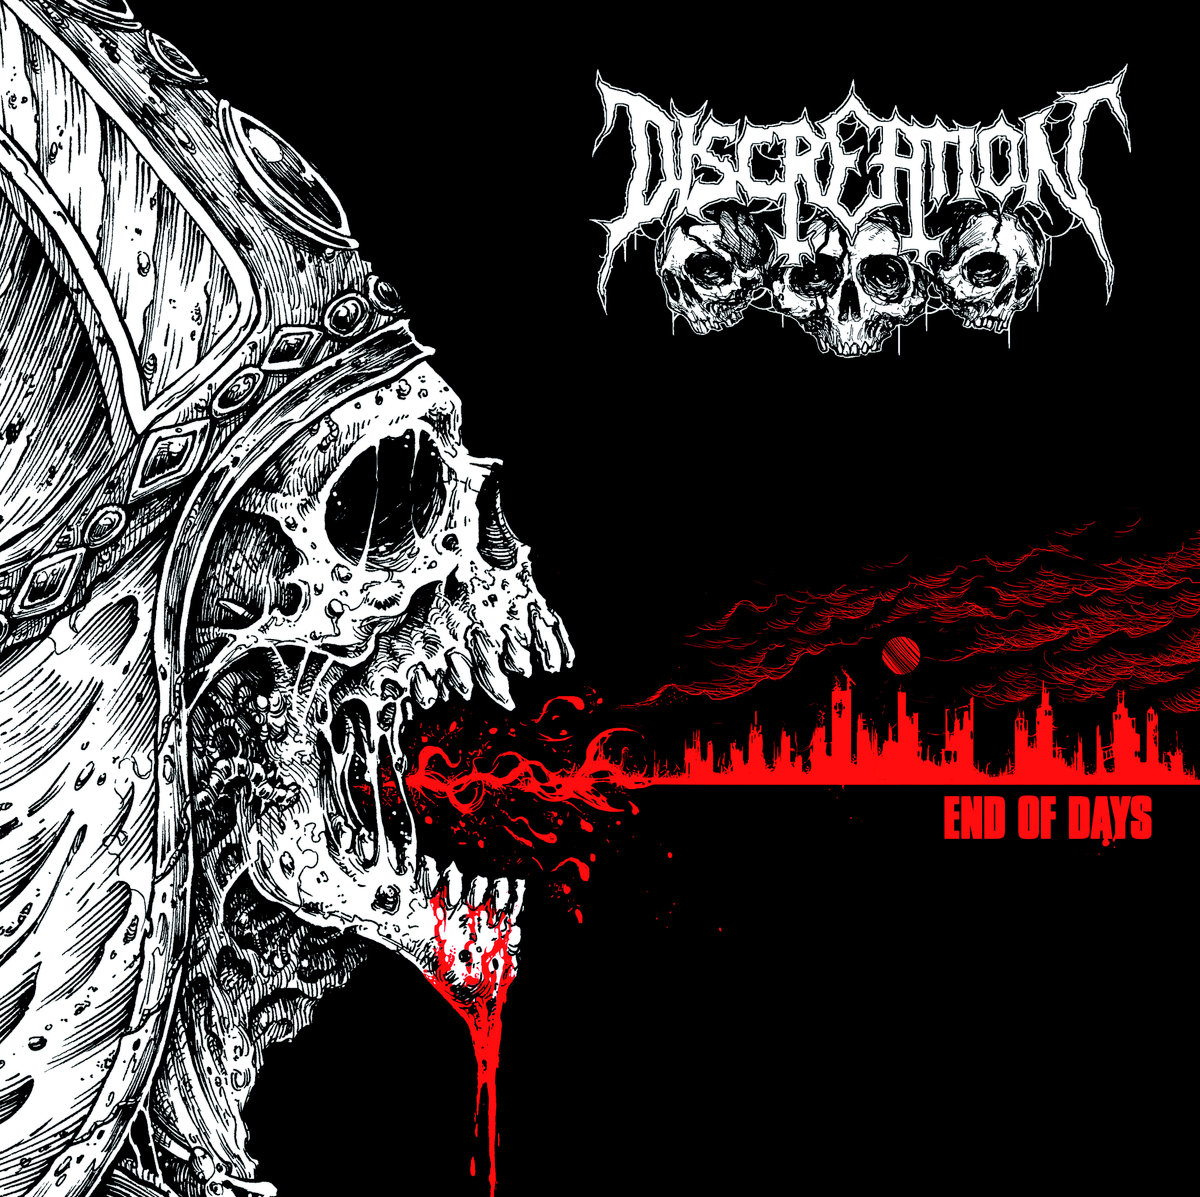 Discreation – End Of Days